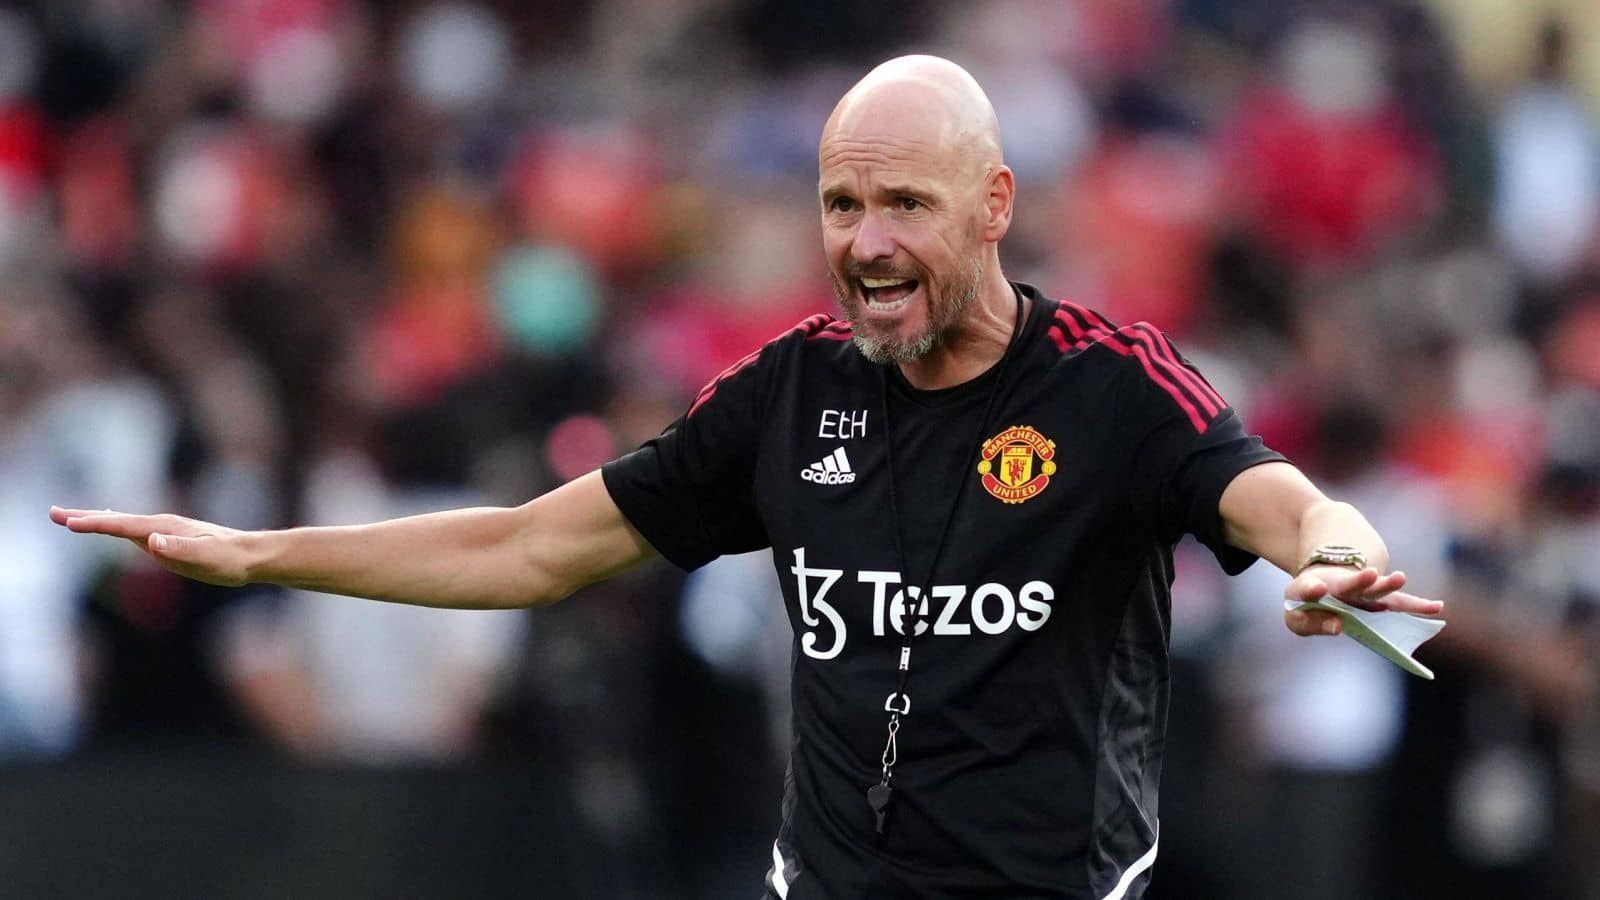 Erik ten Hag lost his debut Premier League game in charge of Manchester United and now he aims to change that